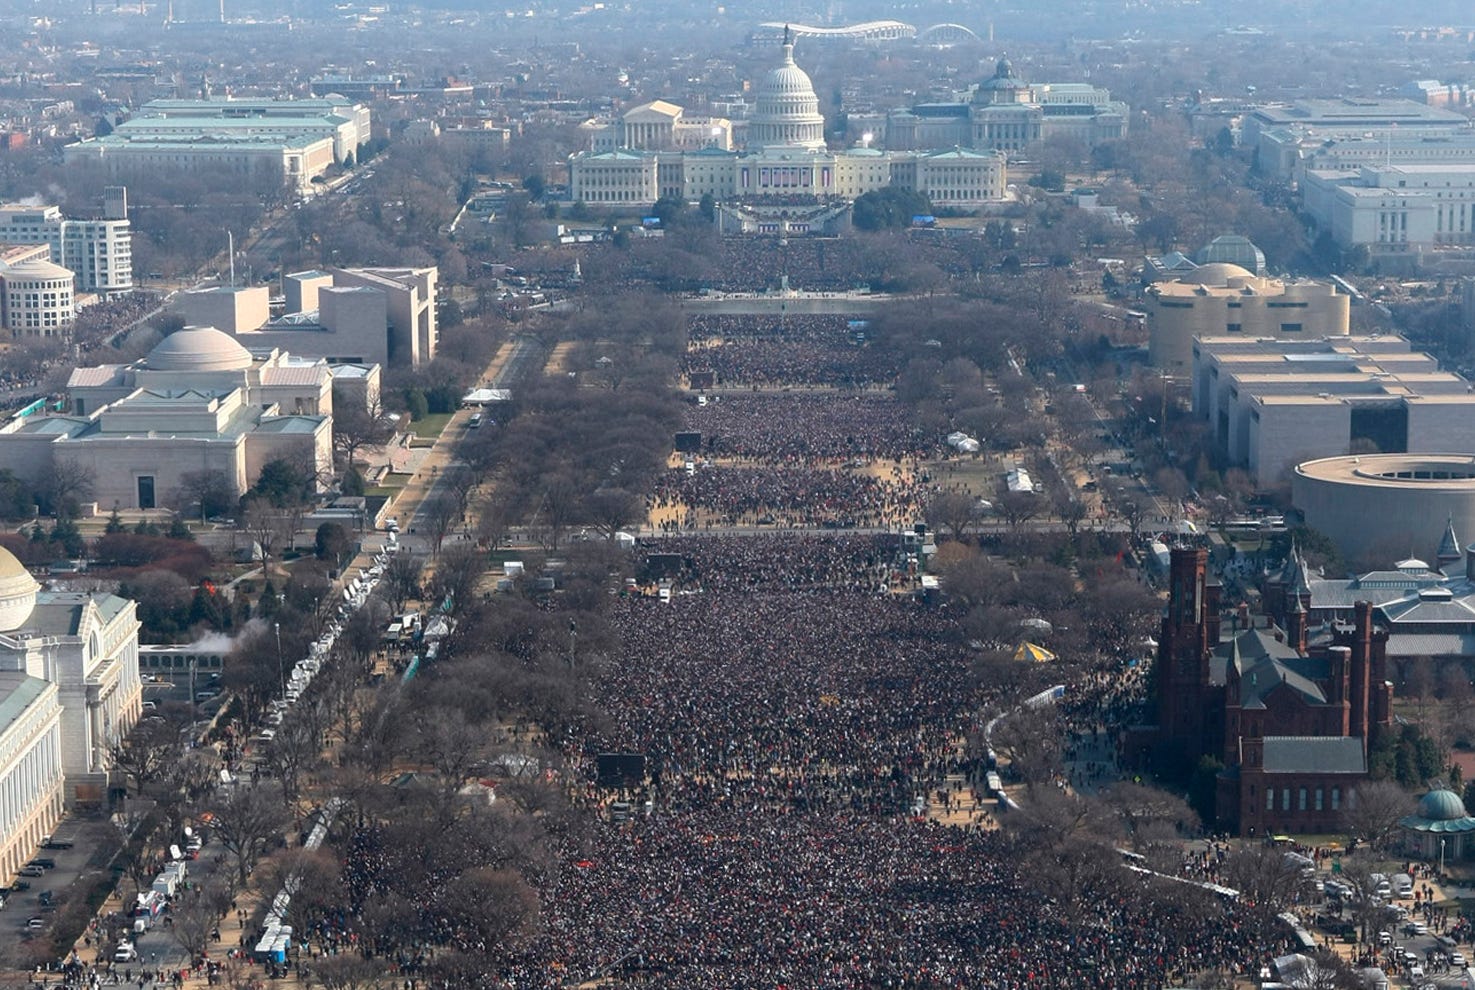 FILE- This pair of photos shows a view of the crowd on the National Mall at the inaugurations of President Barack Obama, above, on Jan. 20, 2009, and President Donald Trump, below, on Jan. 20, 2017. The photo above and the screengrab from video below were both shot shortly before noon from the top of the Washington Monument. On his first full day in office, President Donald Trump called the acting director of the National Park Service to dispute widely circulated photos of Trump's inauguration. (AP Photo, File)